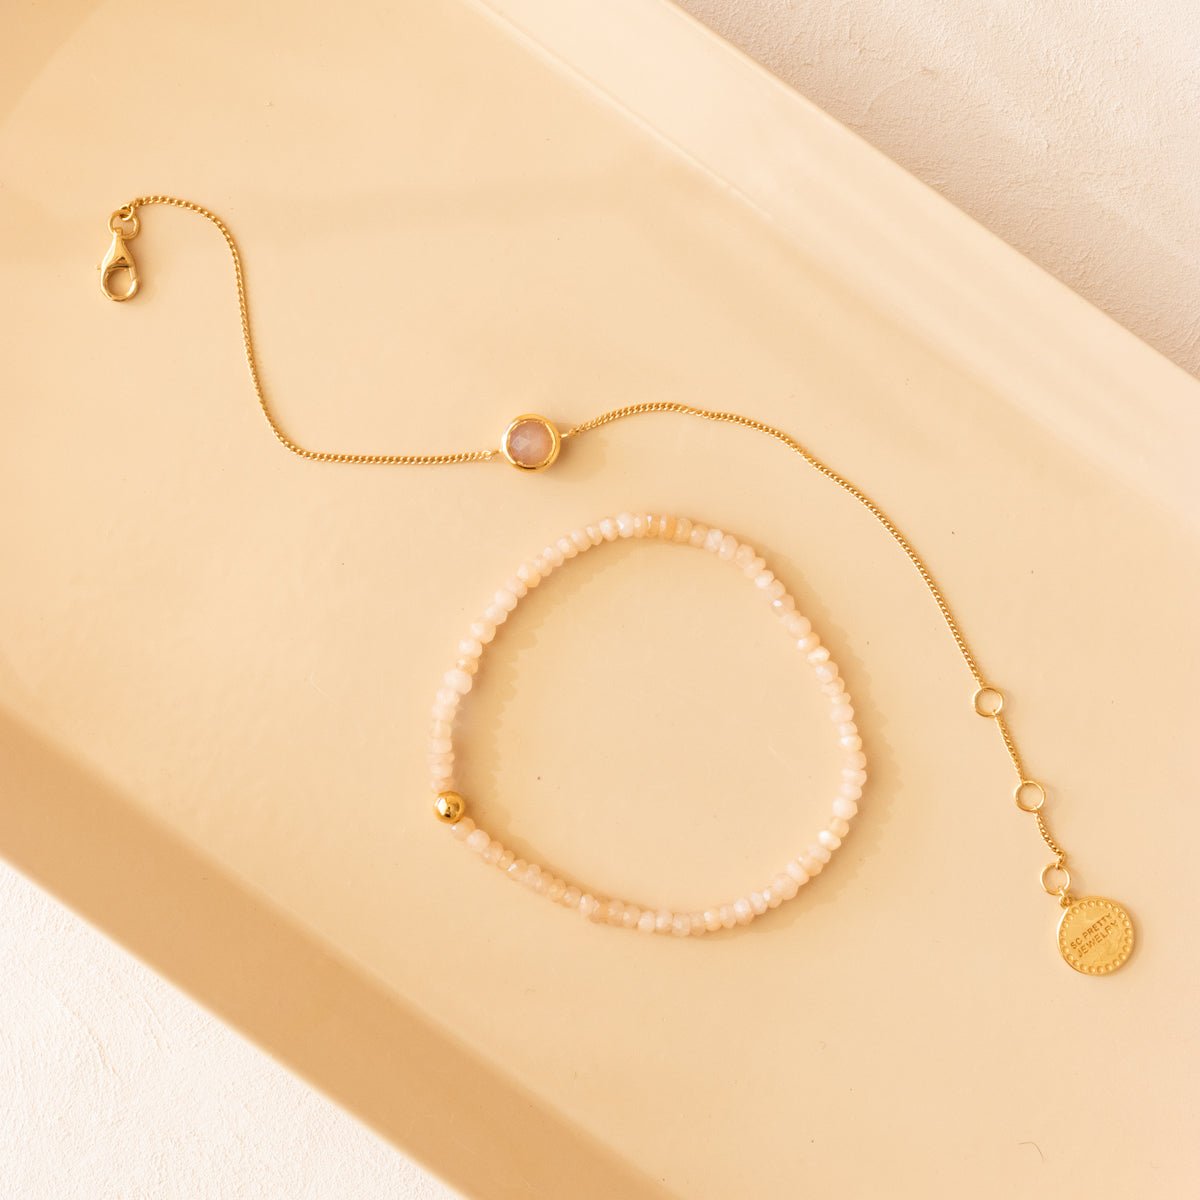 ICONIC BEADED STRETCH BRACELET - PEACH MOONSTONE &amp; GOLD - SO PRETTY CARA COTTER